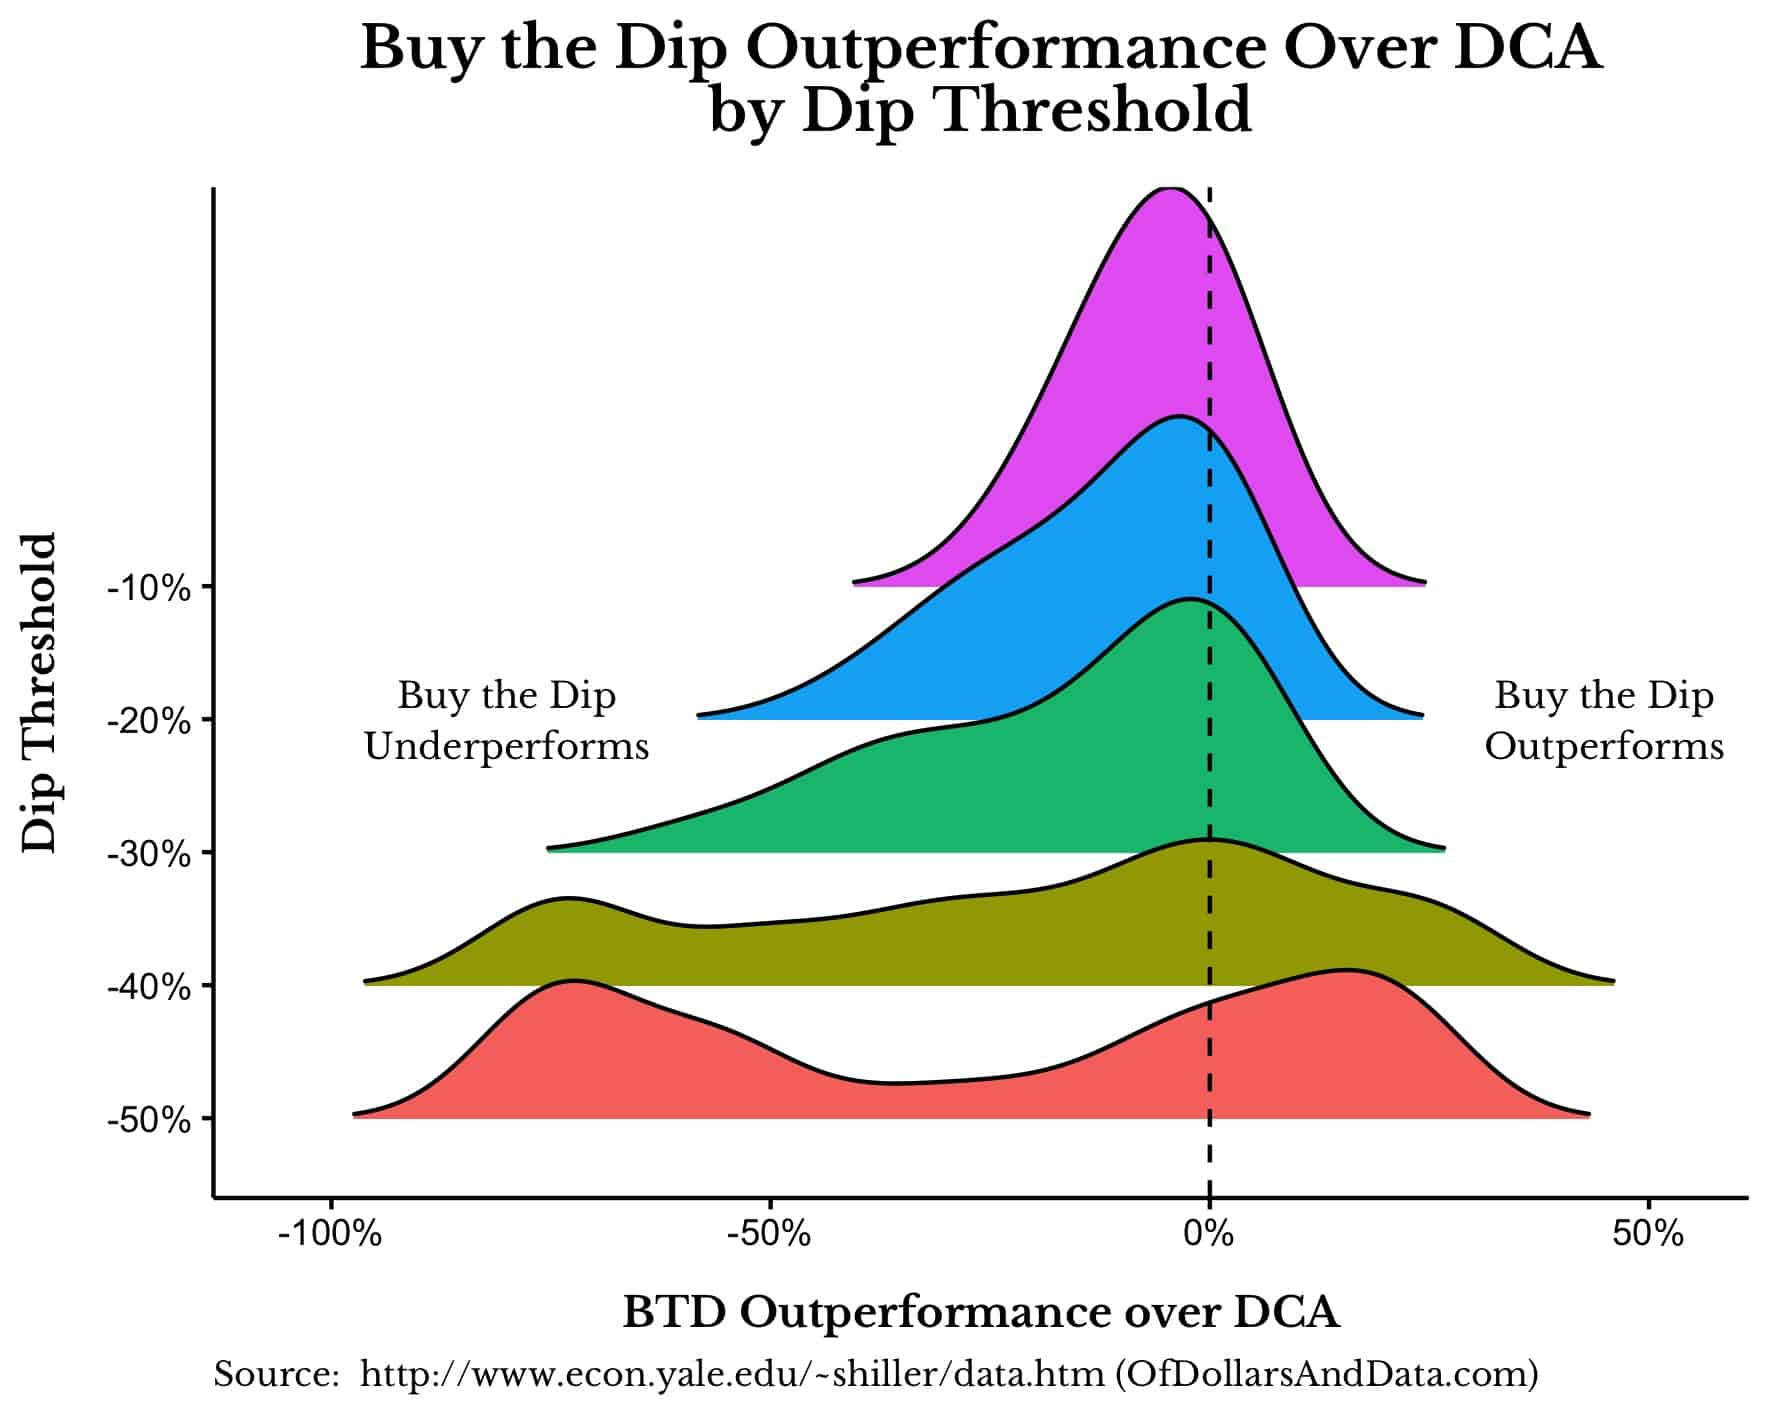 Buy the dip outperformance over DCA by dip threshold